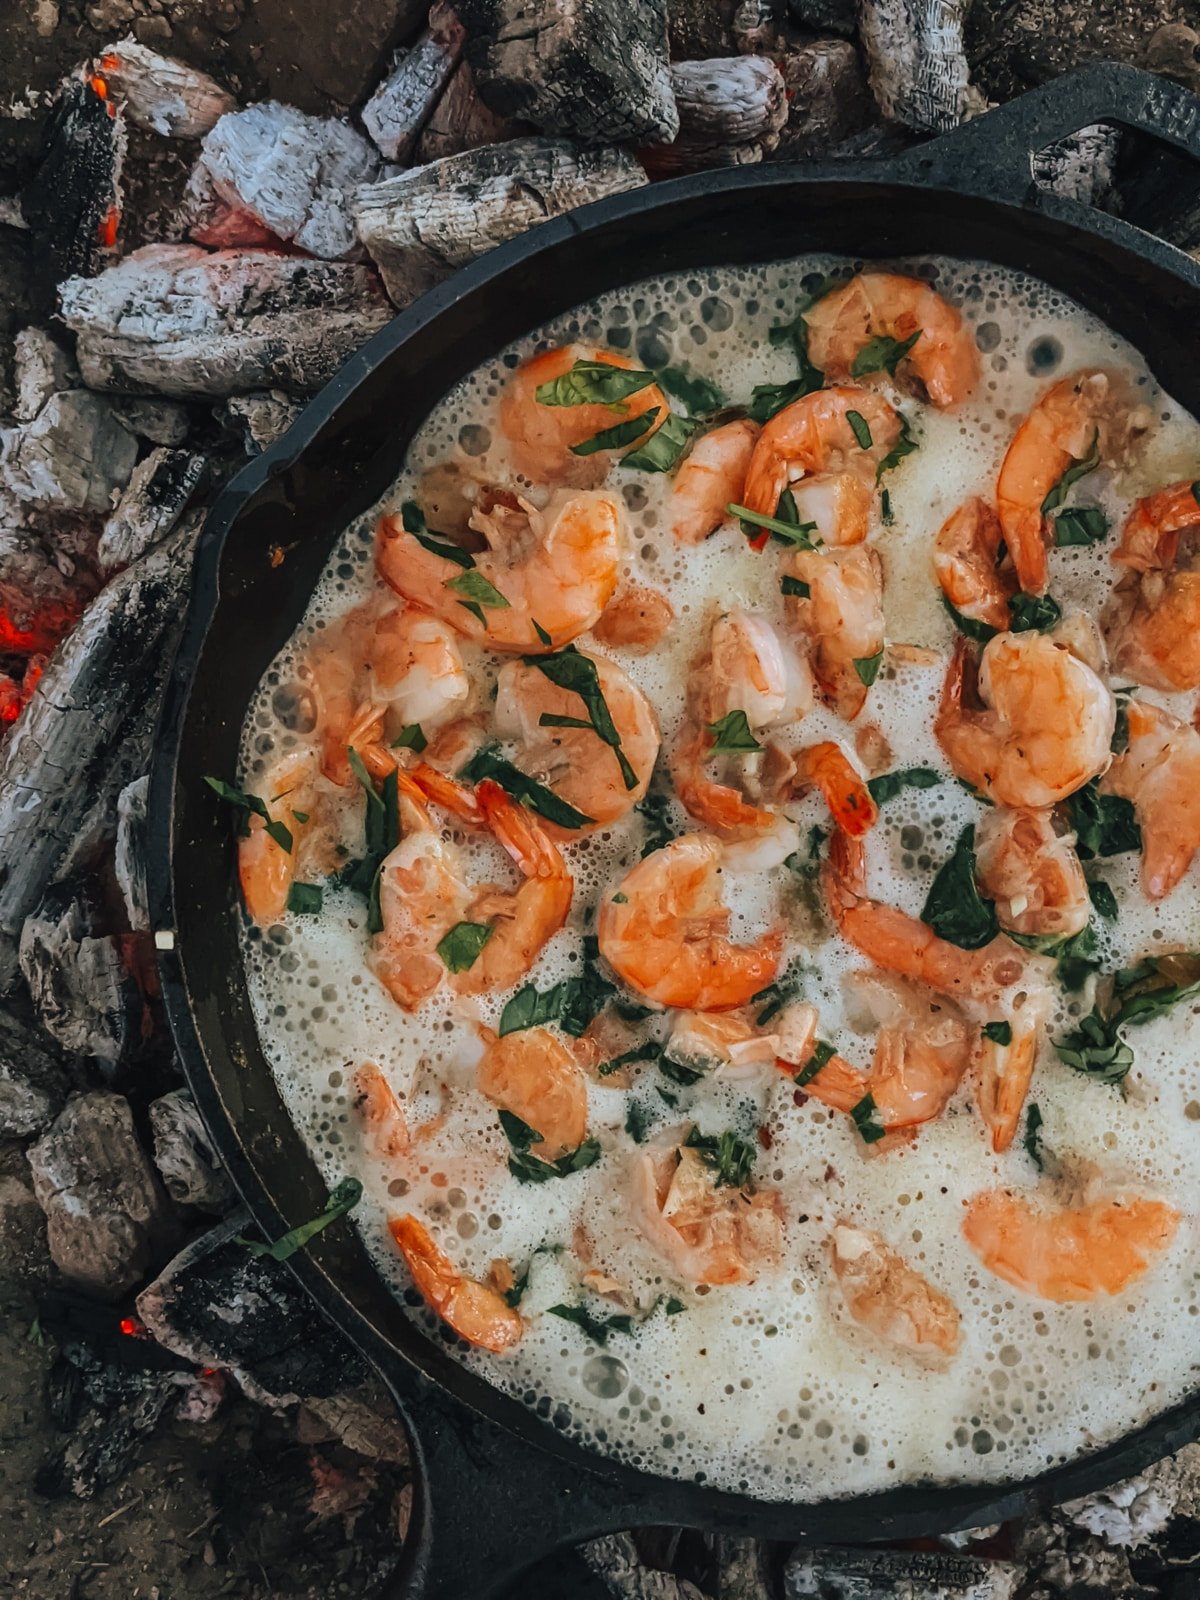 Cast iron skillet filled with garlicky butter shrimp and fresh herbs over a bed of coals.